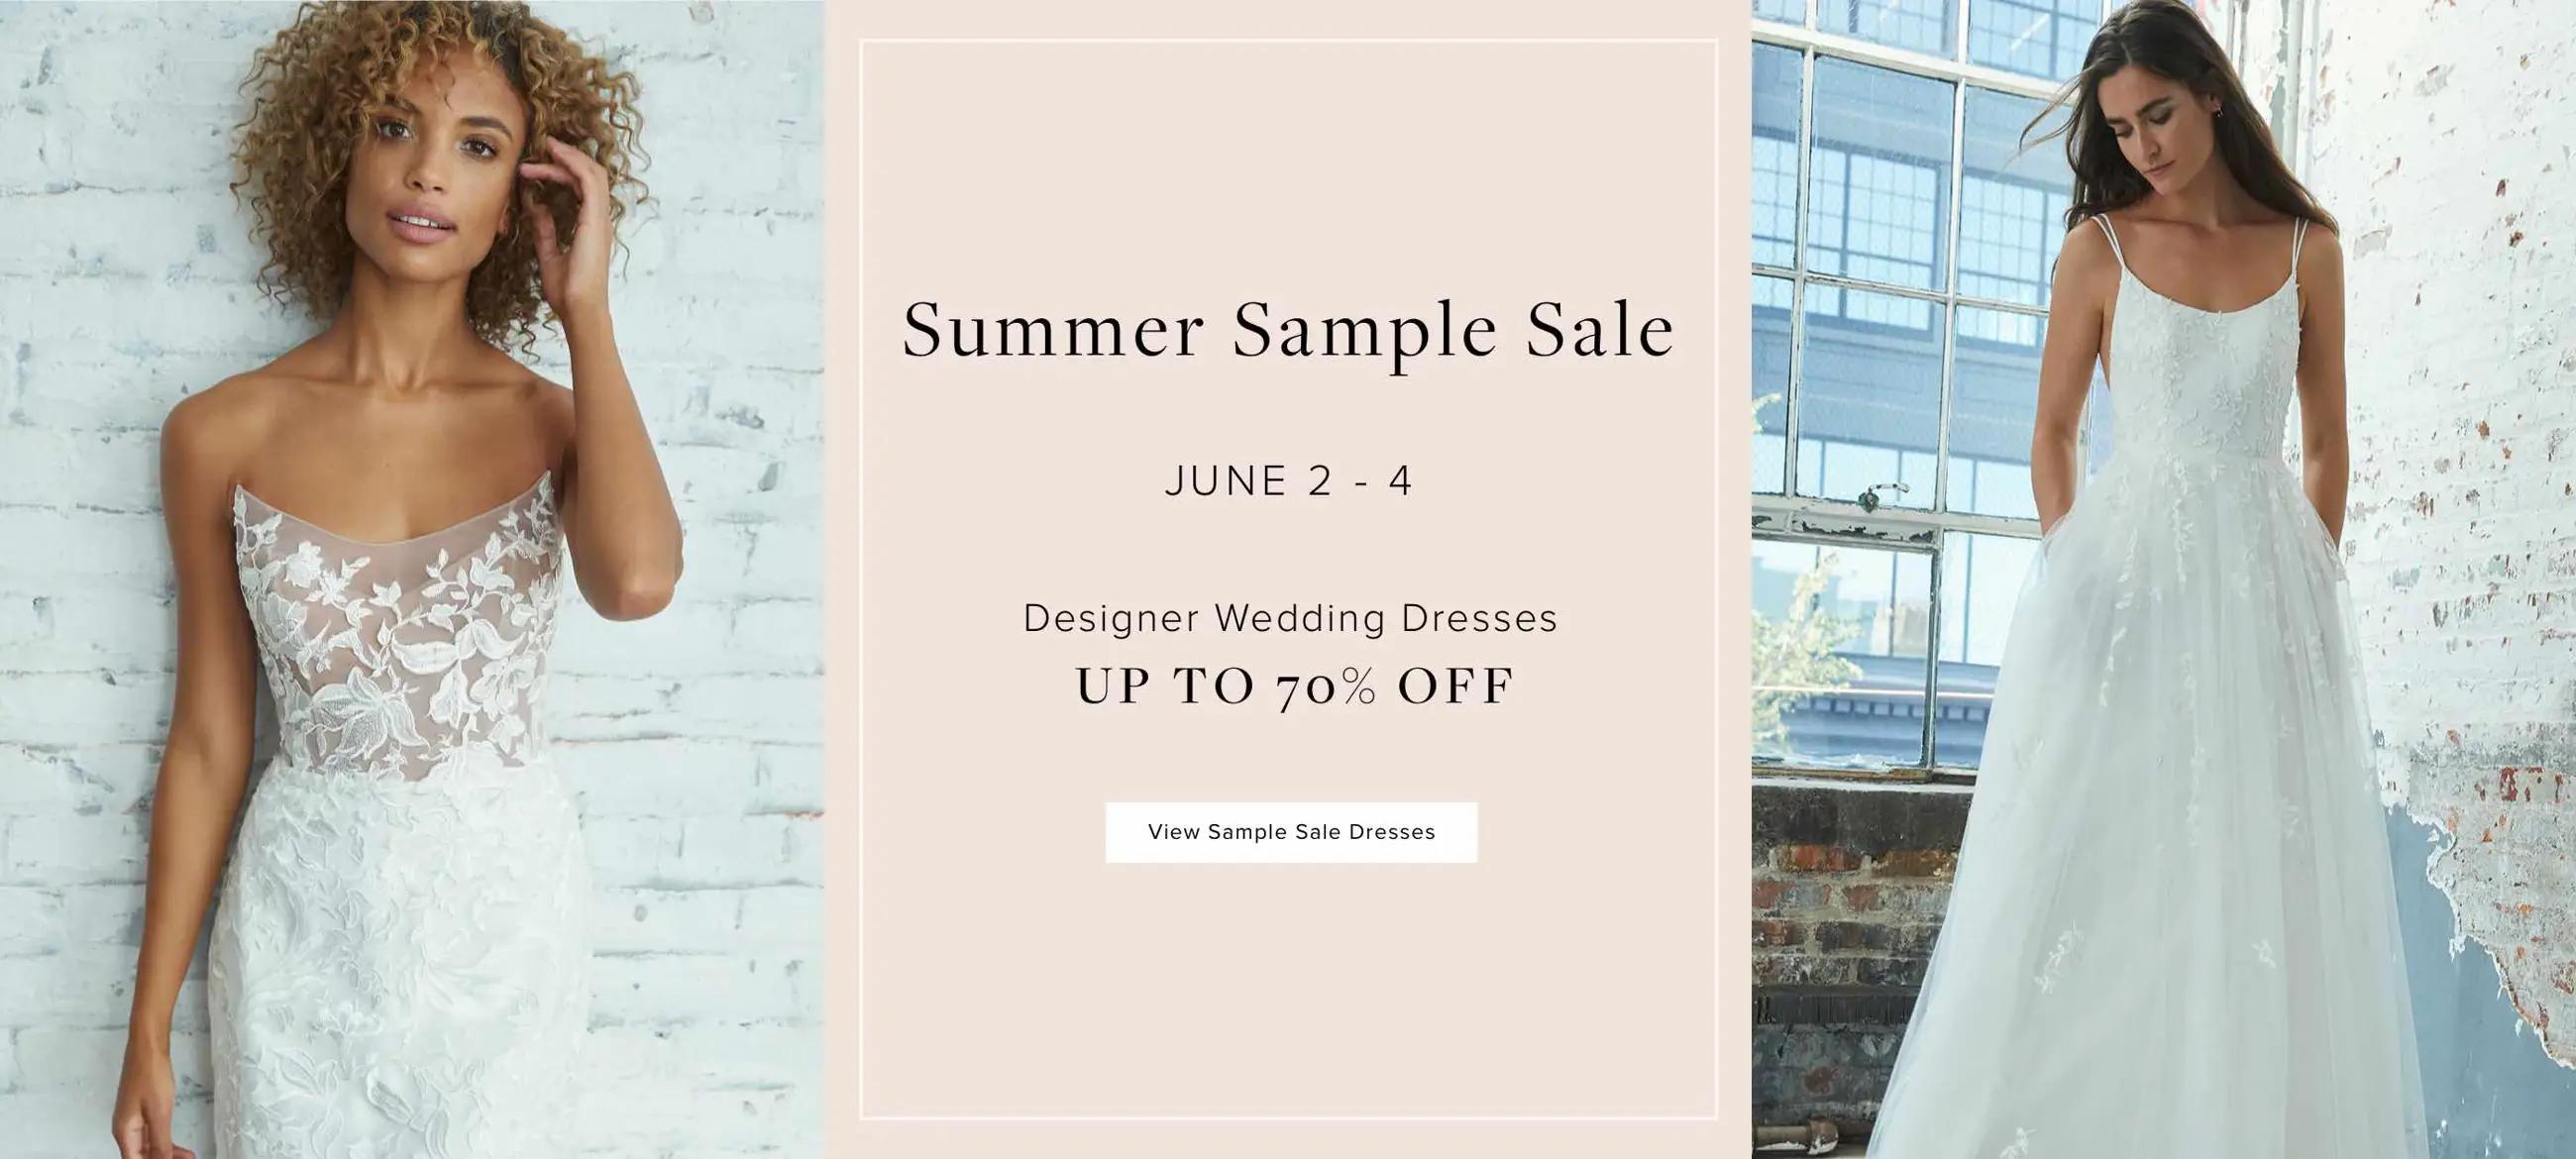 Summer Sample Sale at Kelly Faetanini in NYC